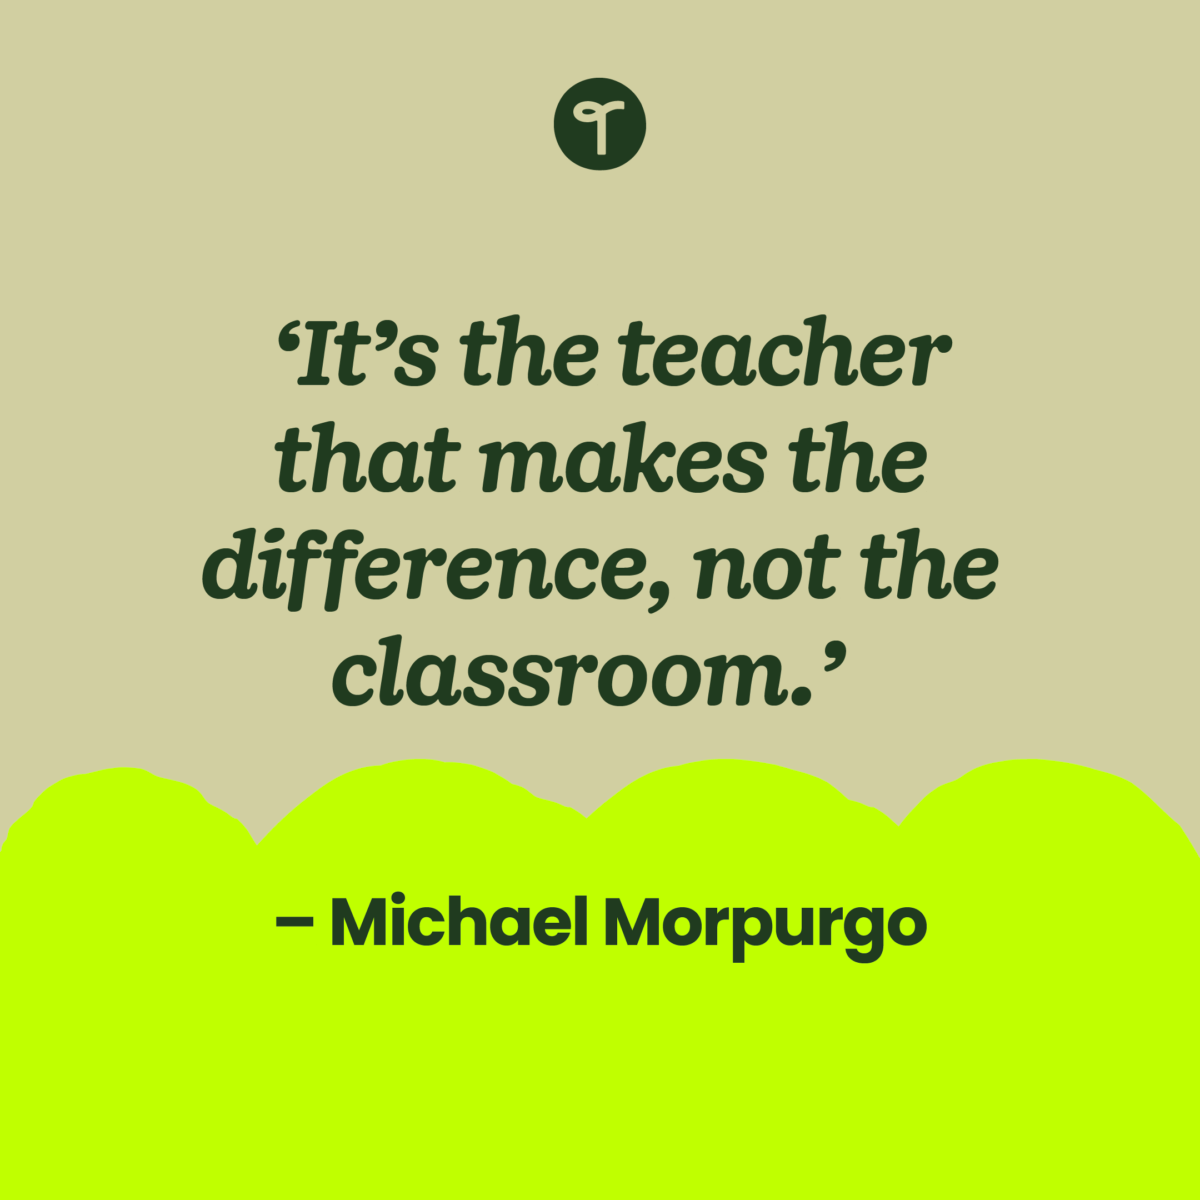 'It’s the teacher that makes the difference, not the classroom.' – Michael Morpurgo written on a beige background with a lime green scalloped edge